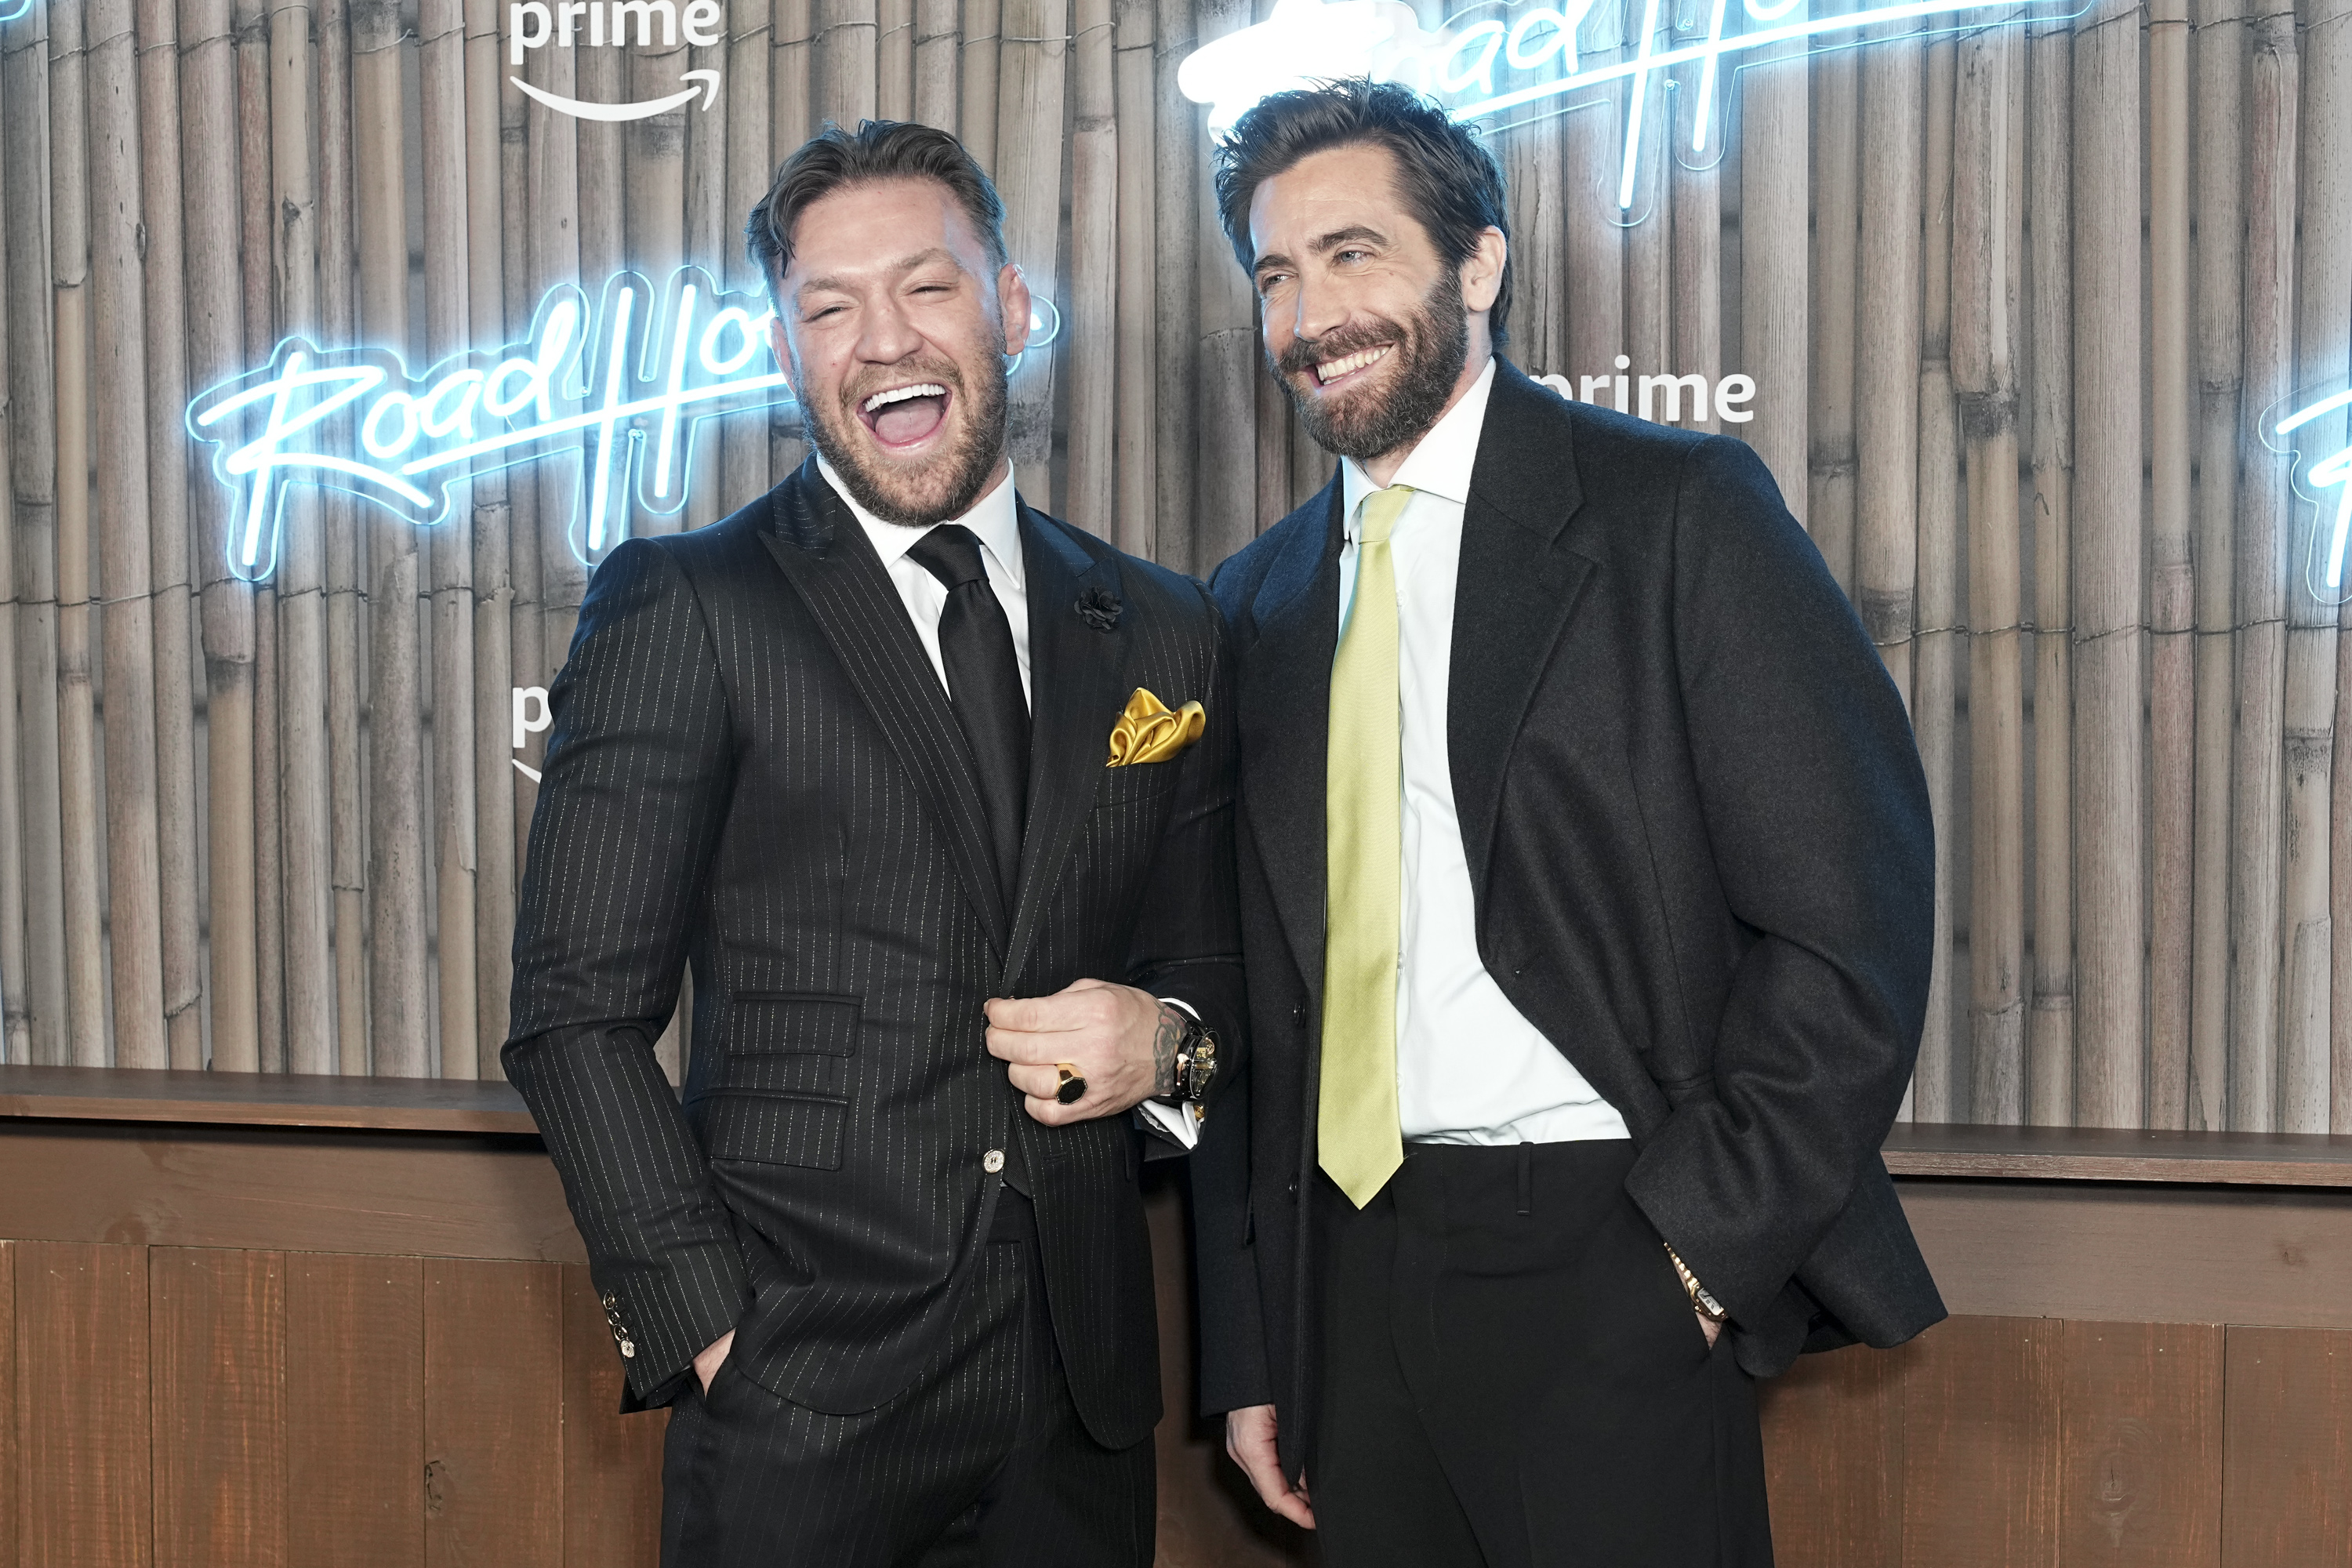 jake and connor laughing, dressed in suits at the premiere